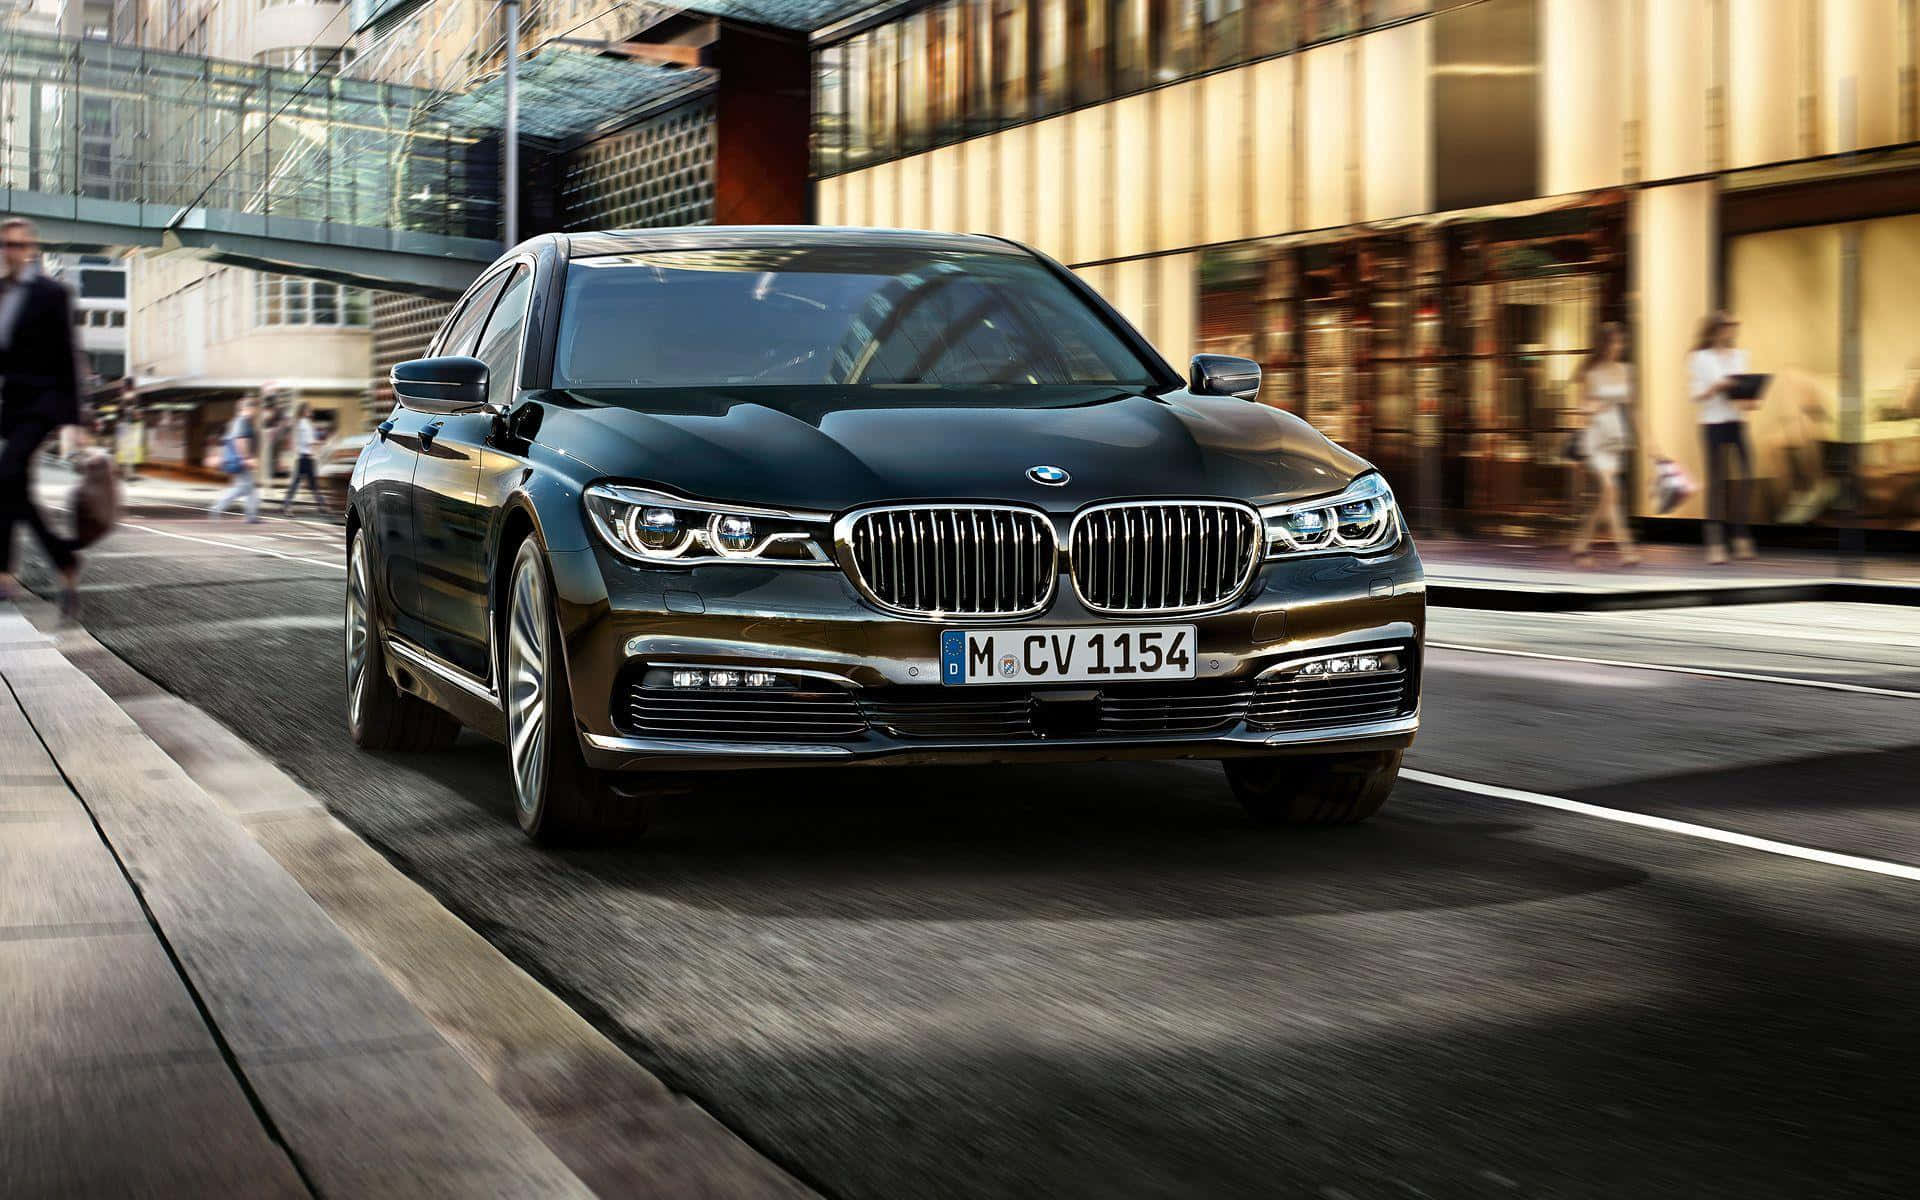 Sleek BMW 7 Series in Motion on a Scenic Road Wallpaper